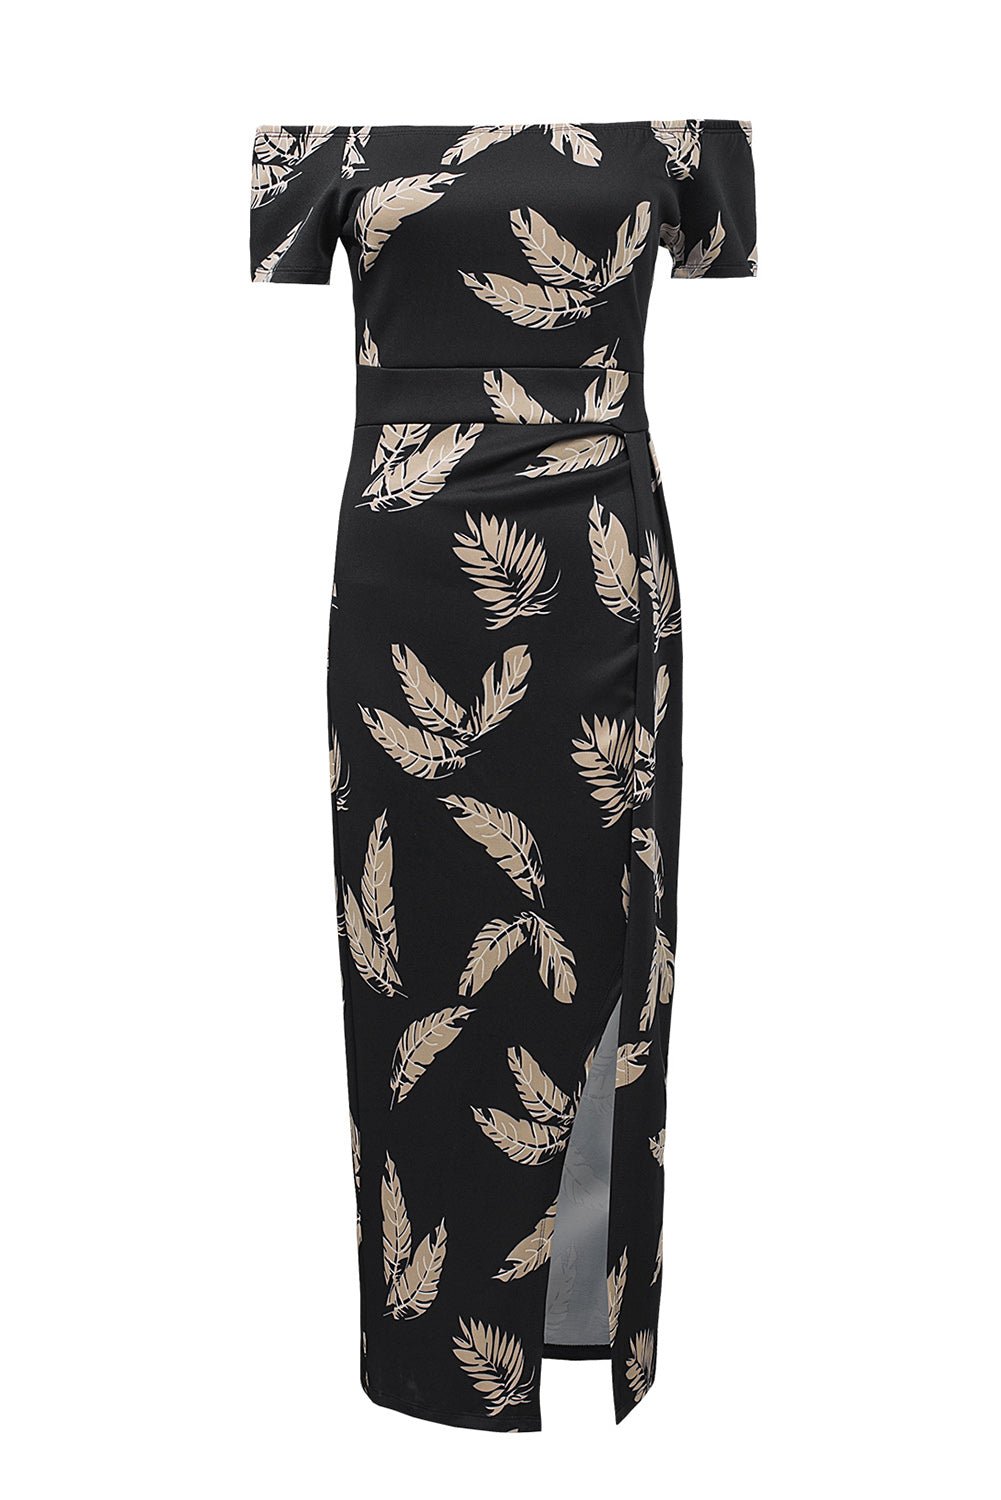 The image is showcasing a Women Floral Off Shoulder Slit Bodycon Midi Dress Elegant Women Casual Formal Party Cocktail Dress at Mommy & Lino's Closet